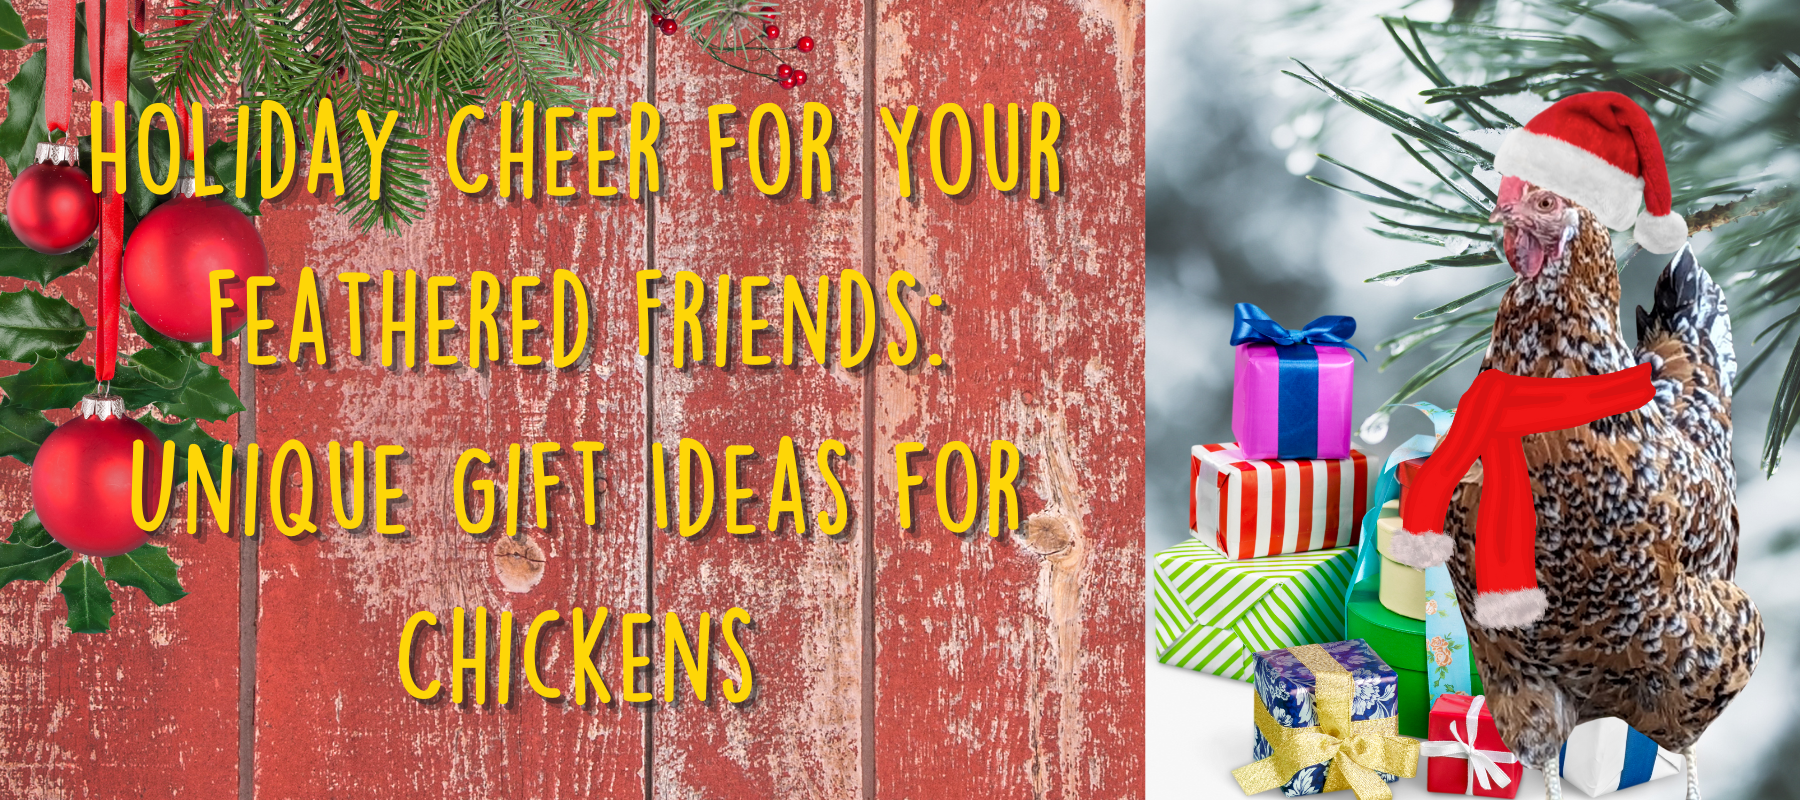 Holiday Cheer for Your Feathered Friends: Unique Gift Ideas for Chickens